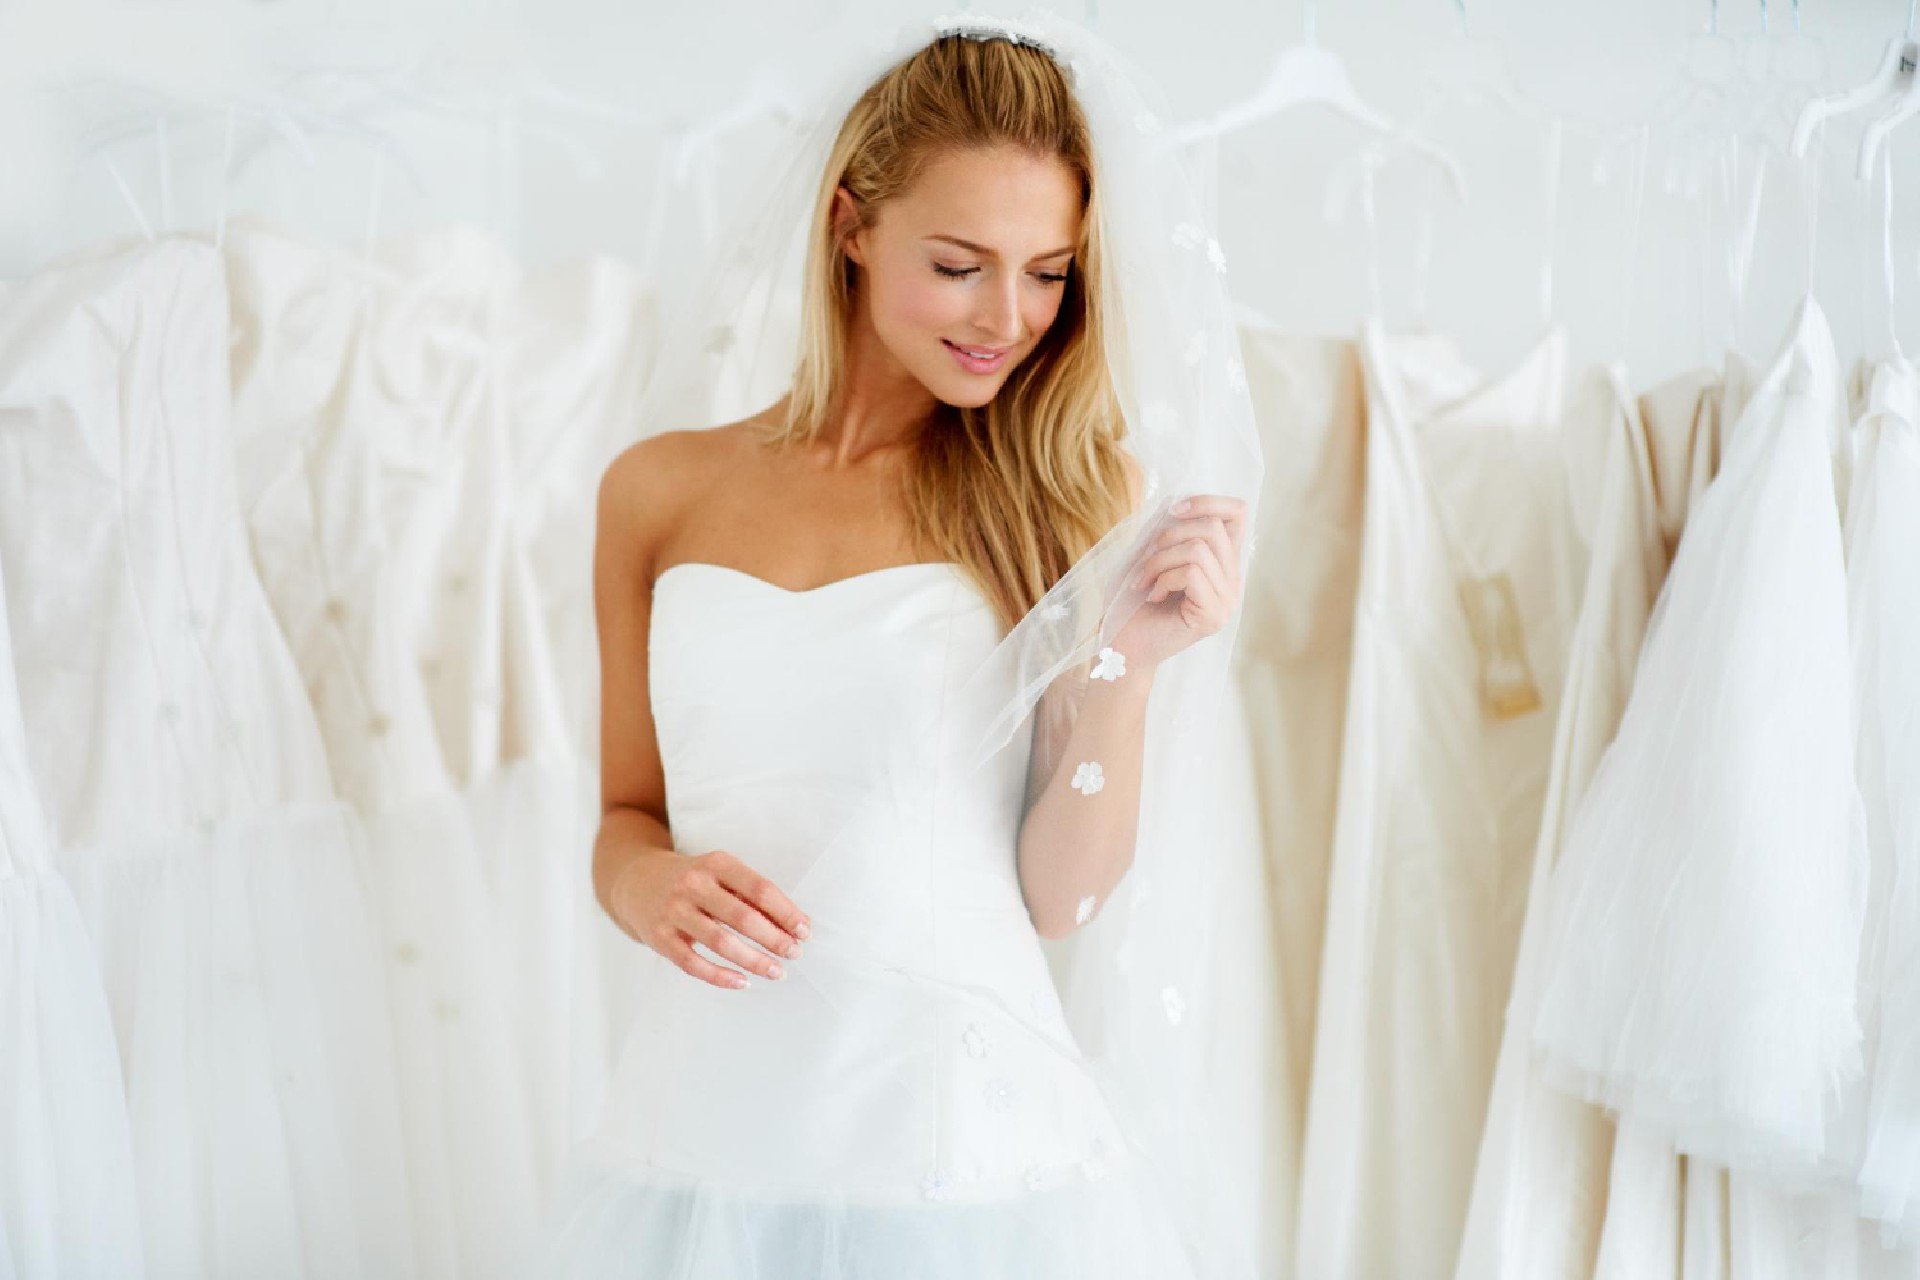 How to Style a Slip Dress - Dress for the Wedding